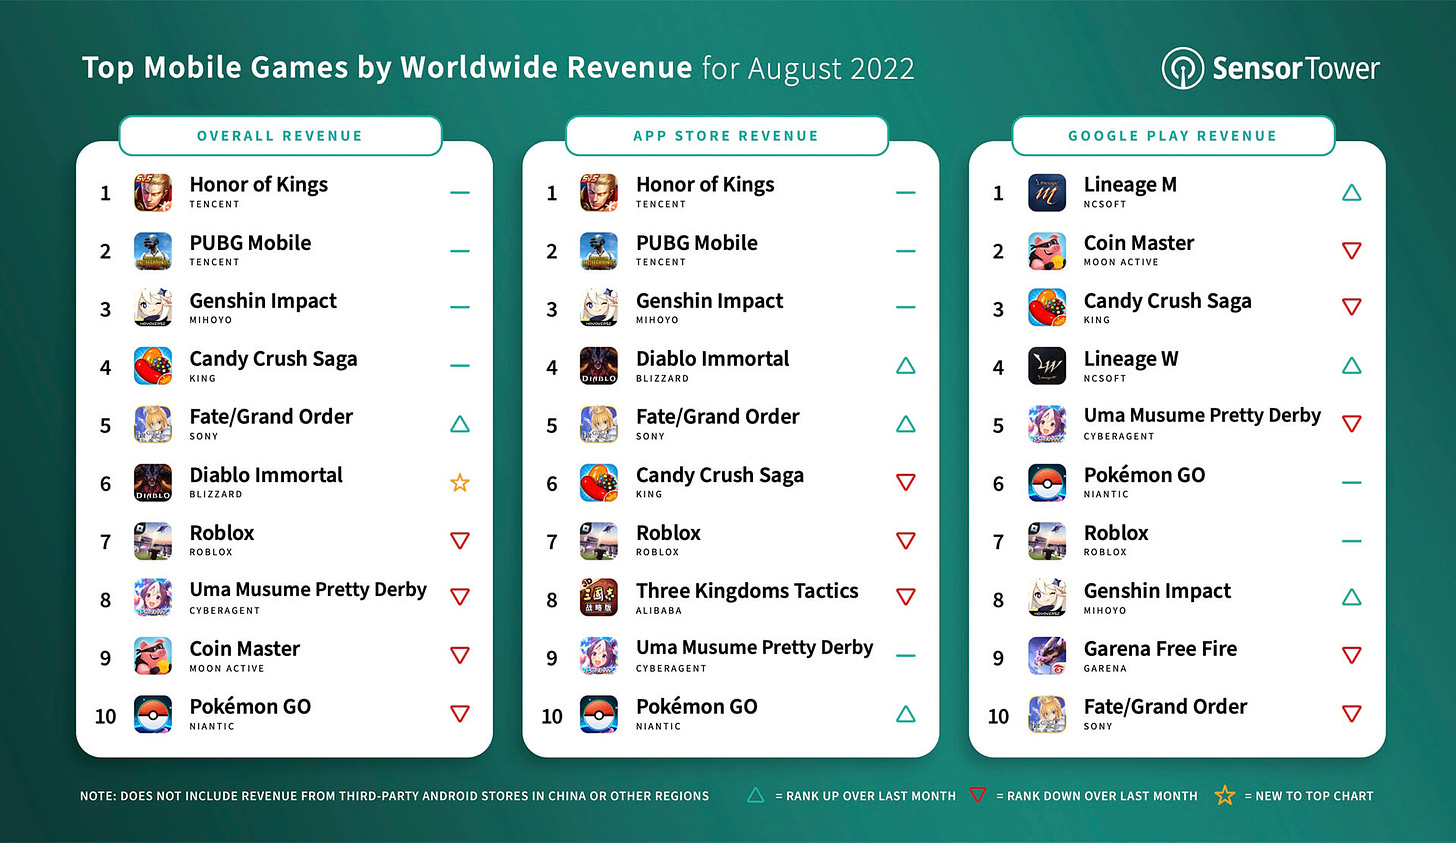 top-mobile-games-by-worldwide-revenue-august-2022